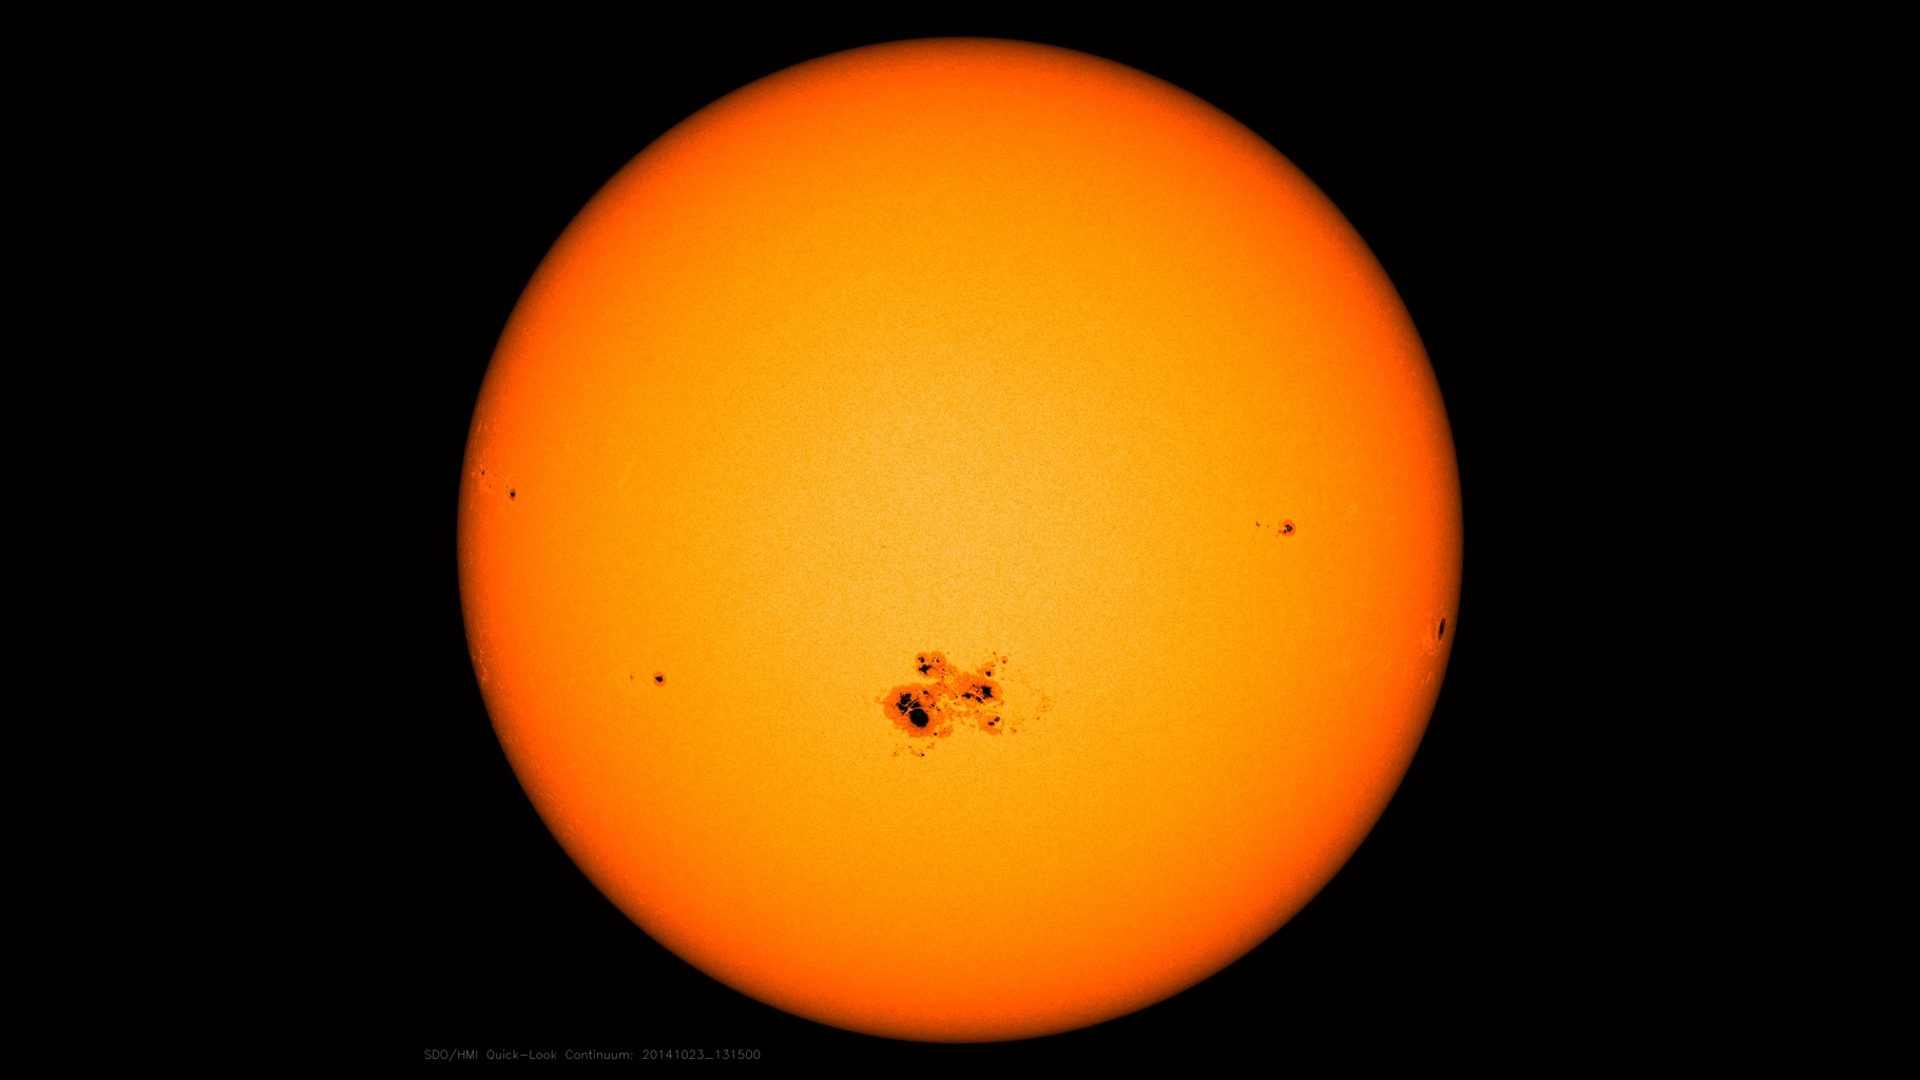 Sunspots are cooler regions on the surface of the sun that can spawn eruptive disturbances, such as solar flares and coronal mass ejections.